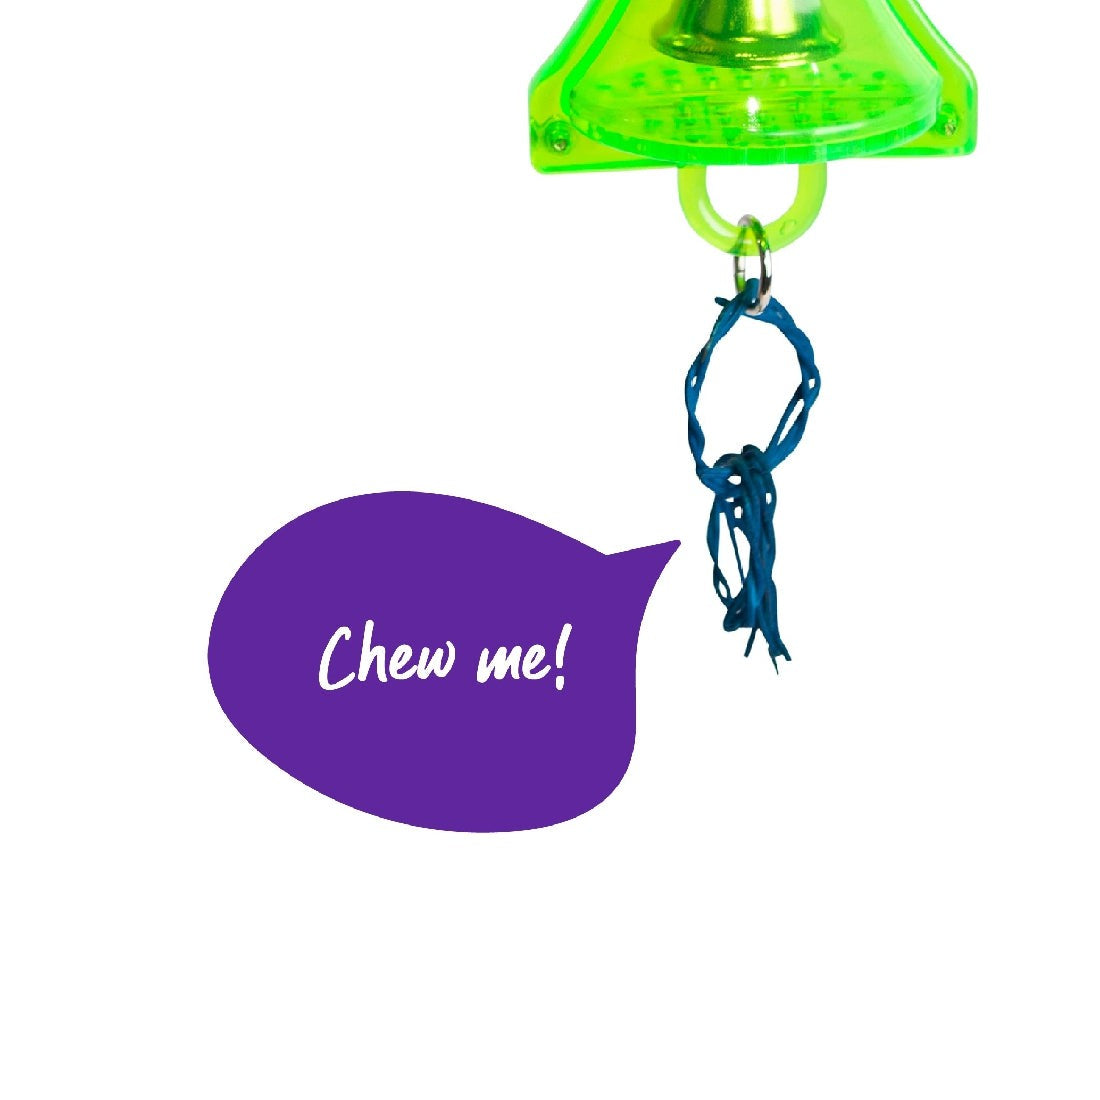 Green and blue bird toy with "Chew me!" bubble, hanging design.